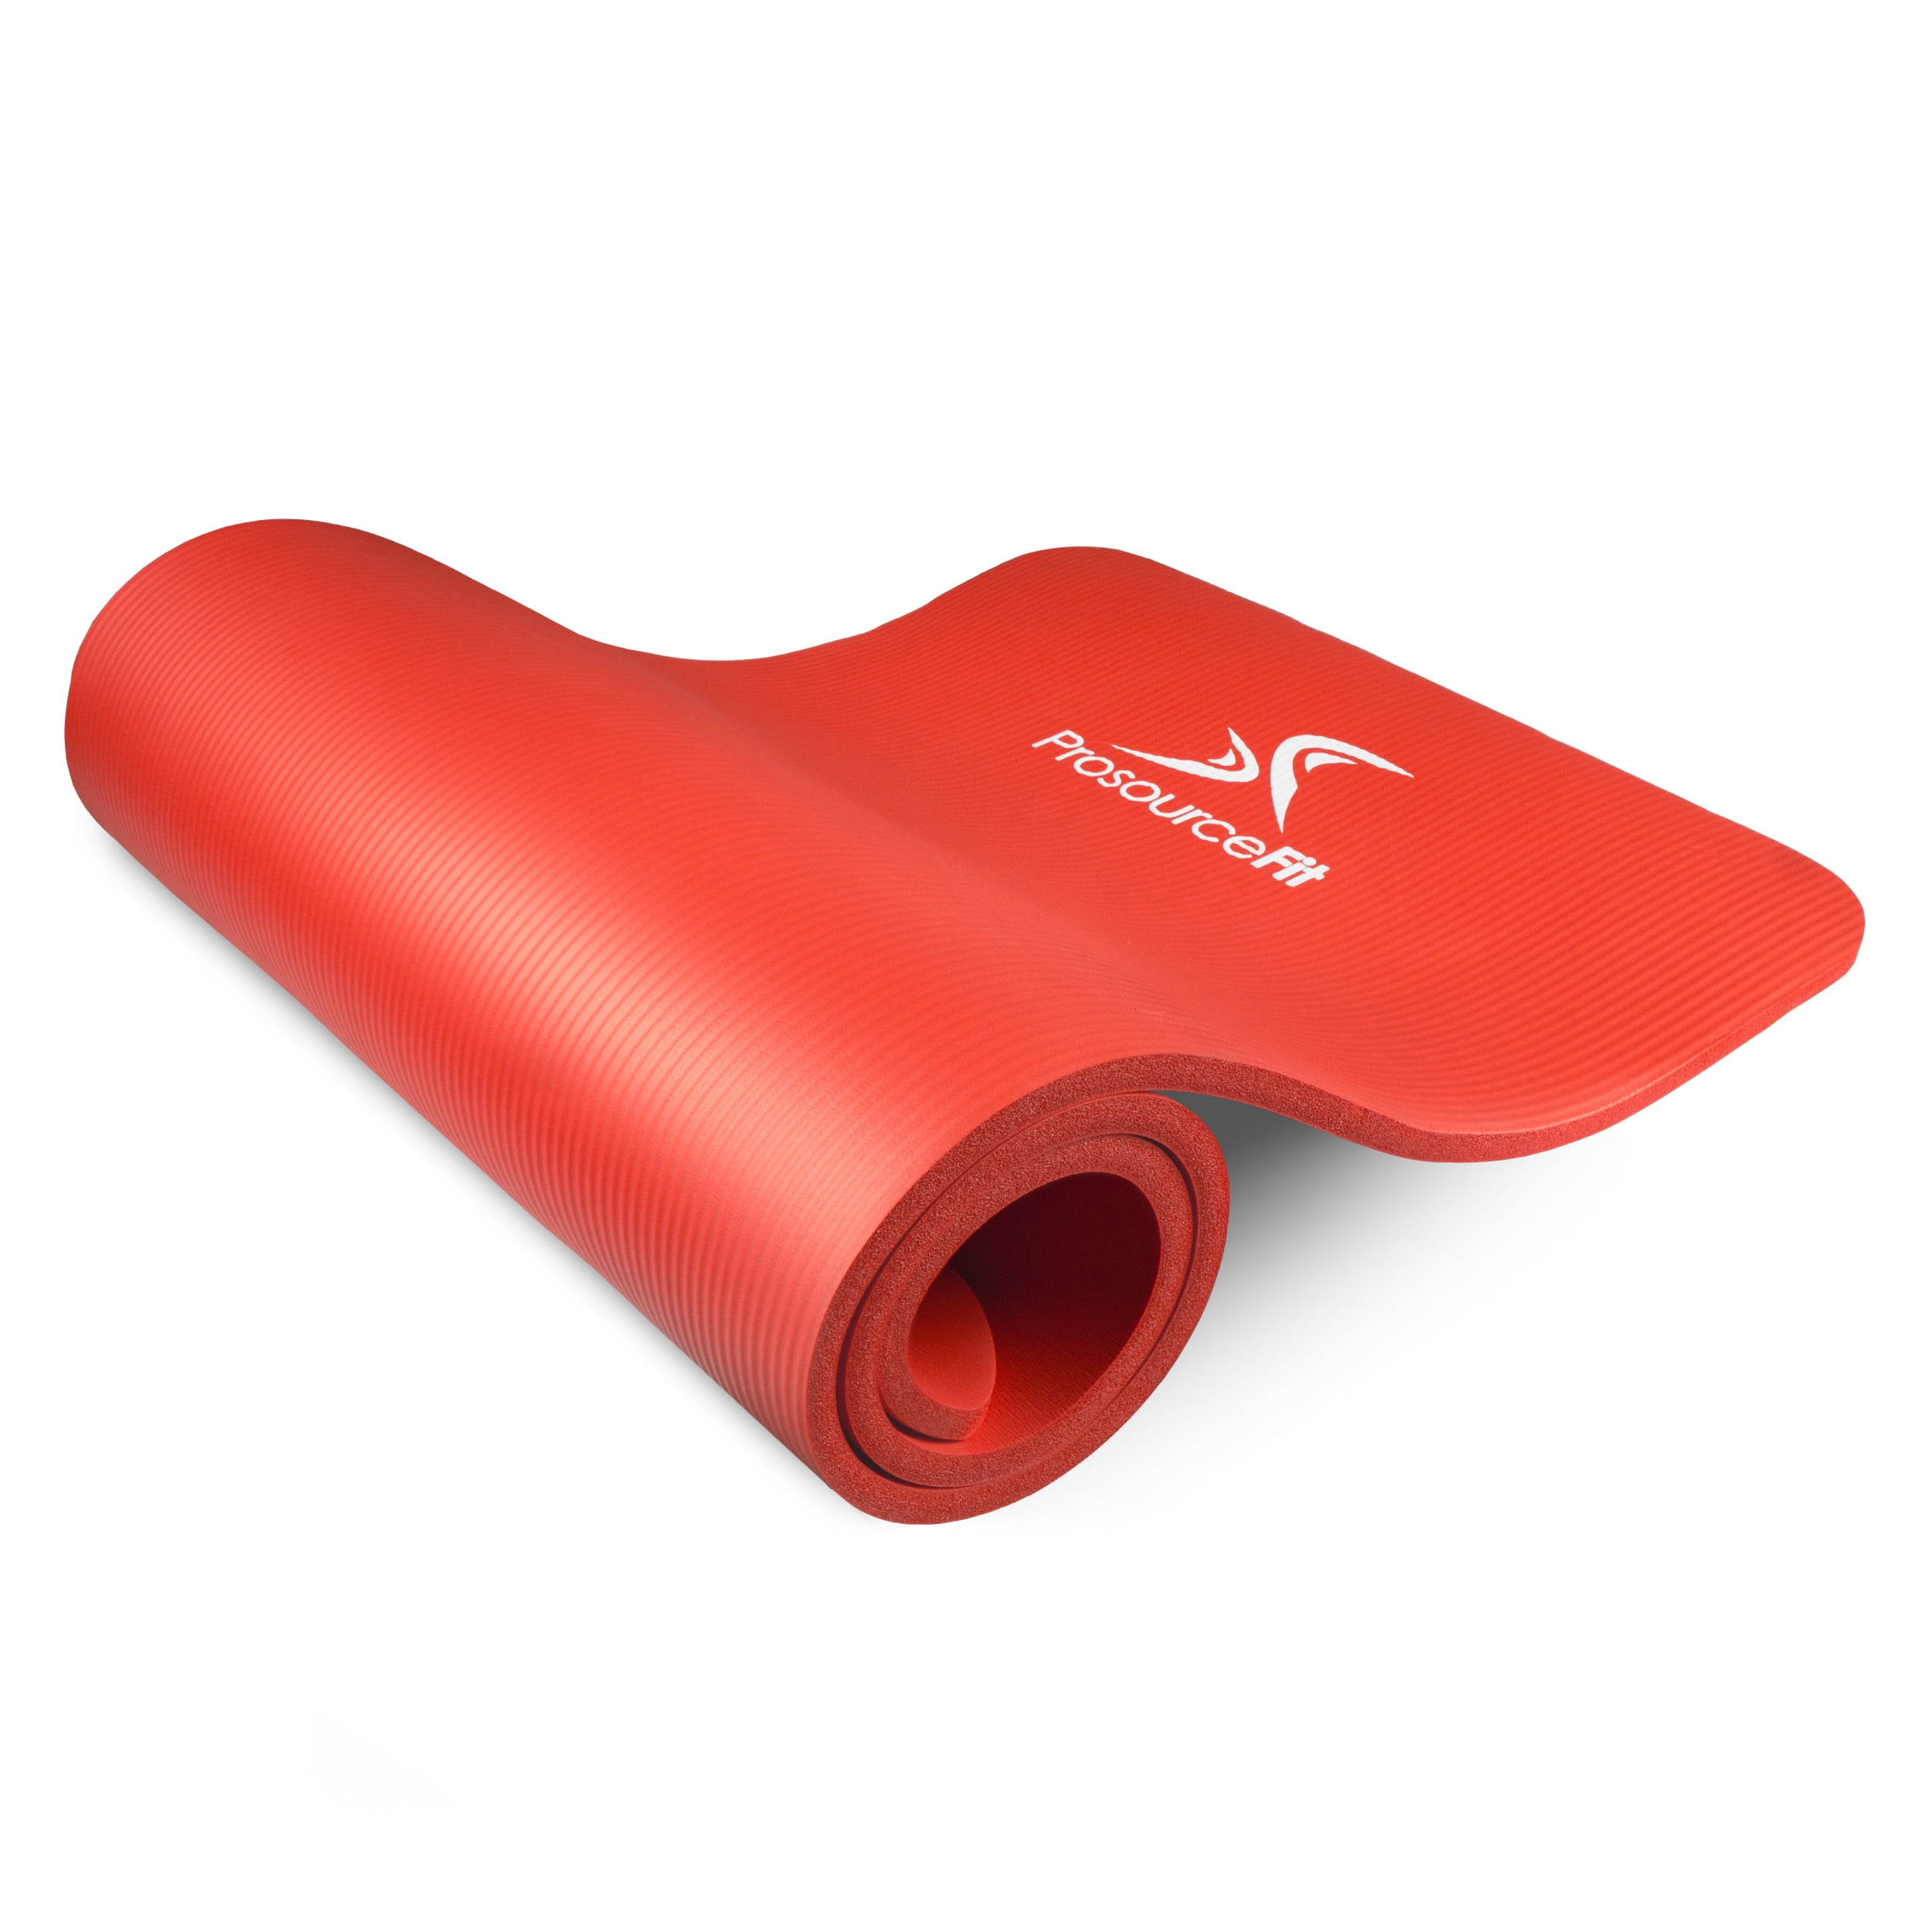 ProsourceFit Extra Thick Yoga and Pilates Mat 1/2-inch or 1-inch